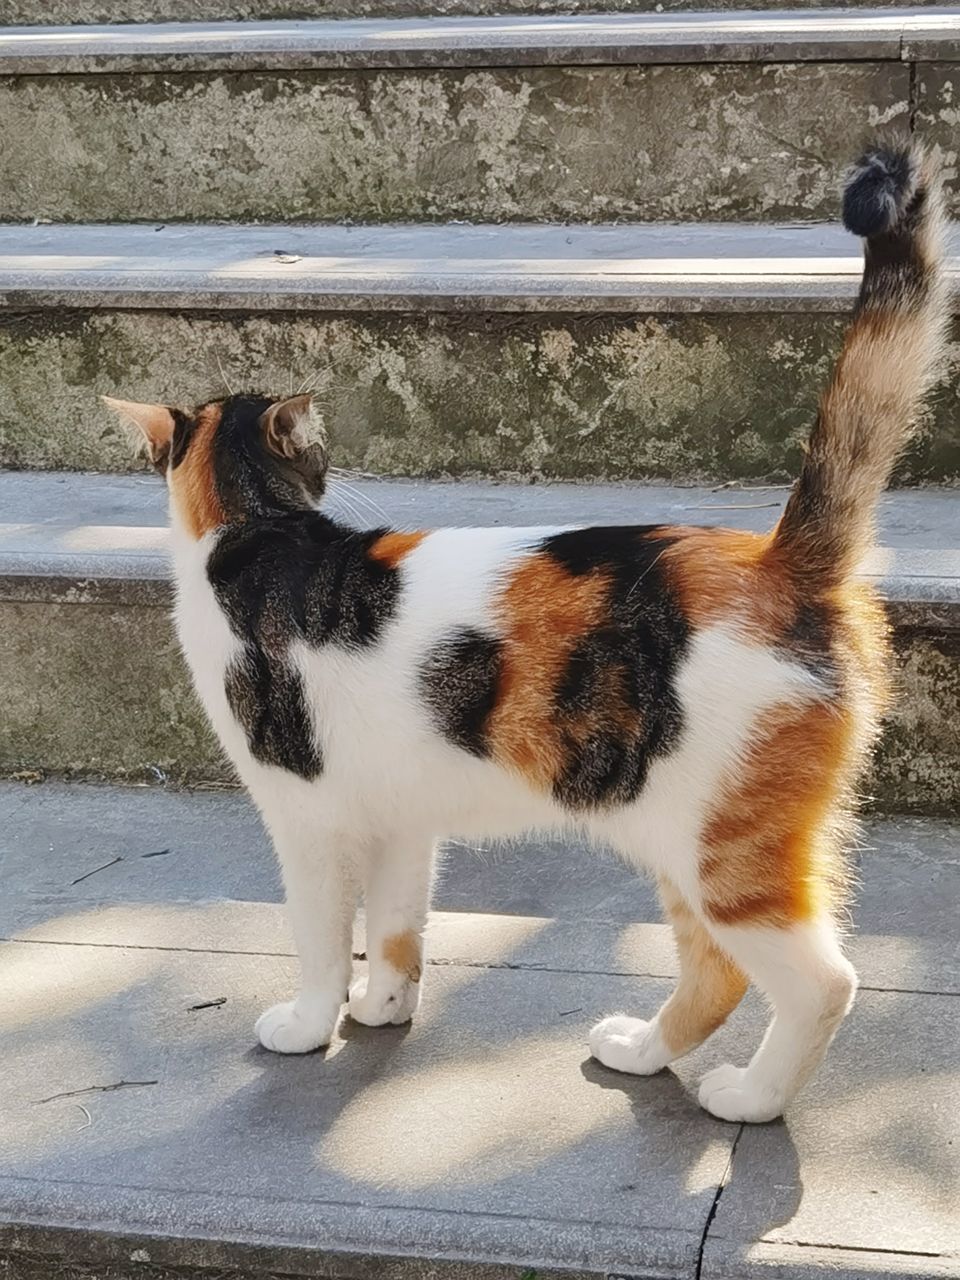 SIDE VIEW OF A CAT